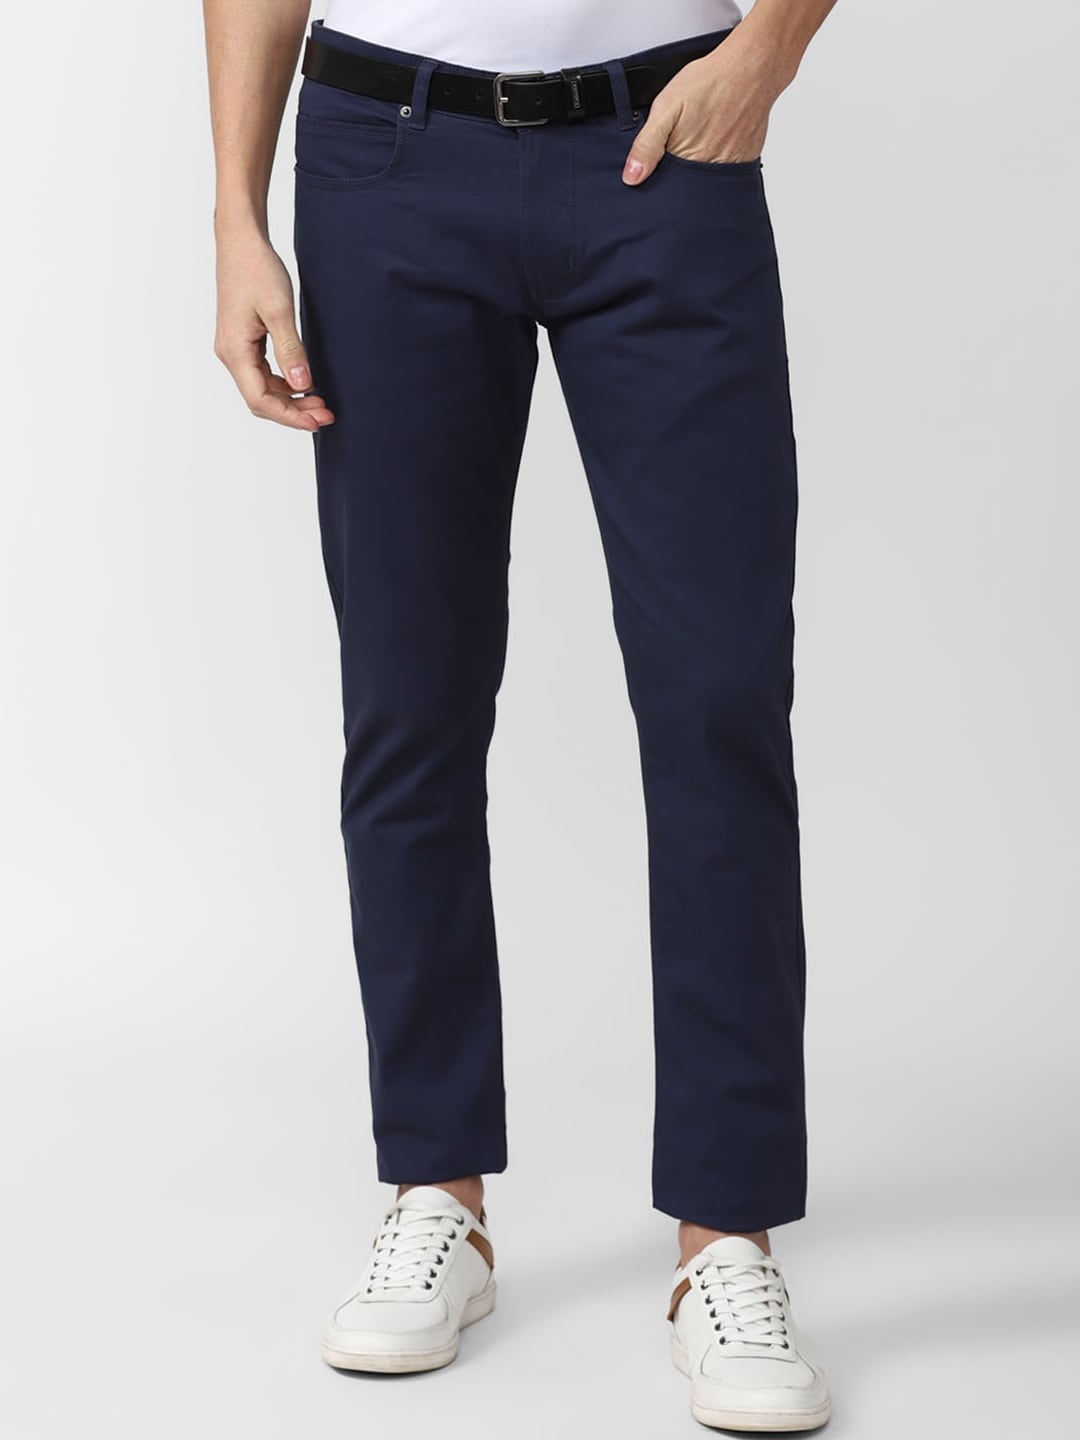 Peter England Casuals Men Navy Blue Slim Fit Cotton Chinos Trousers